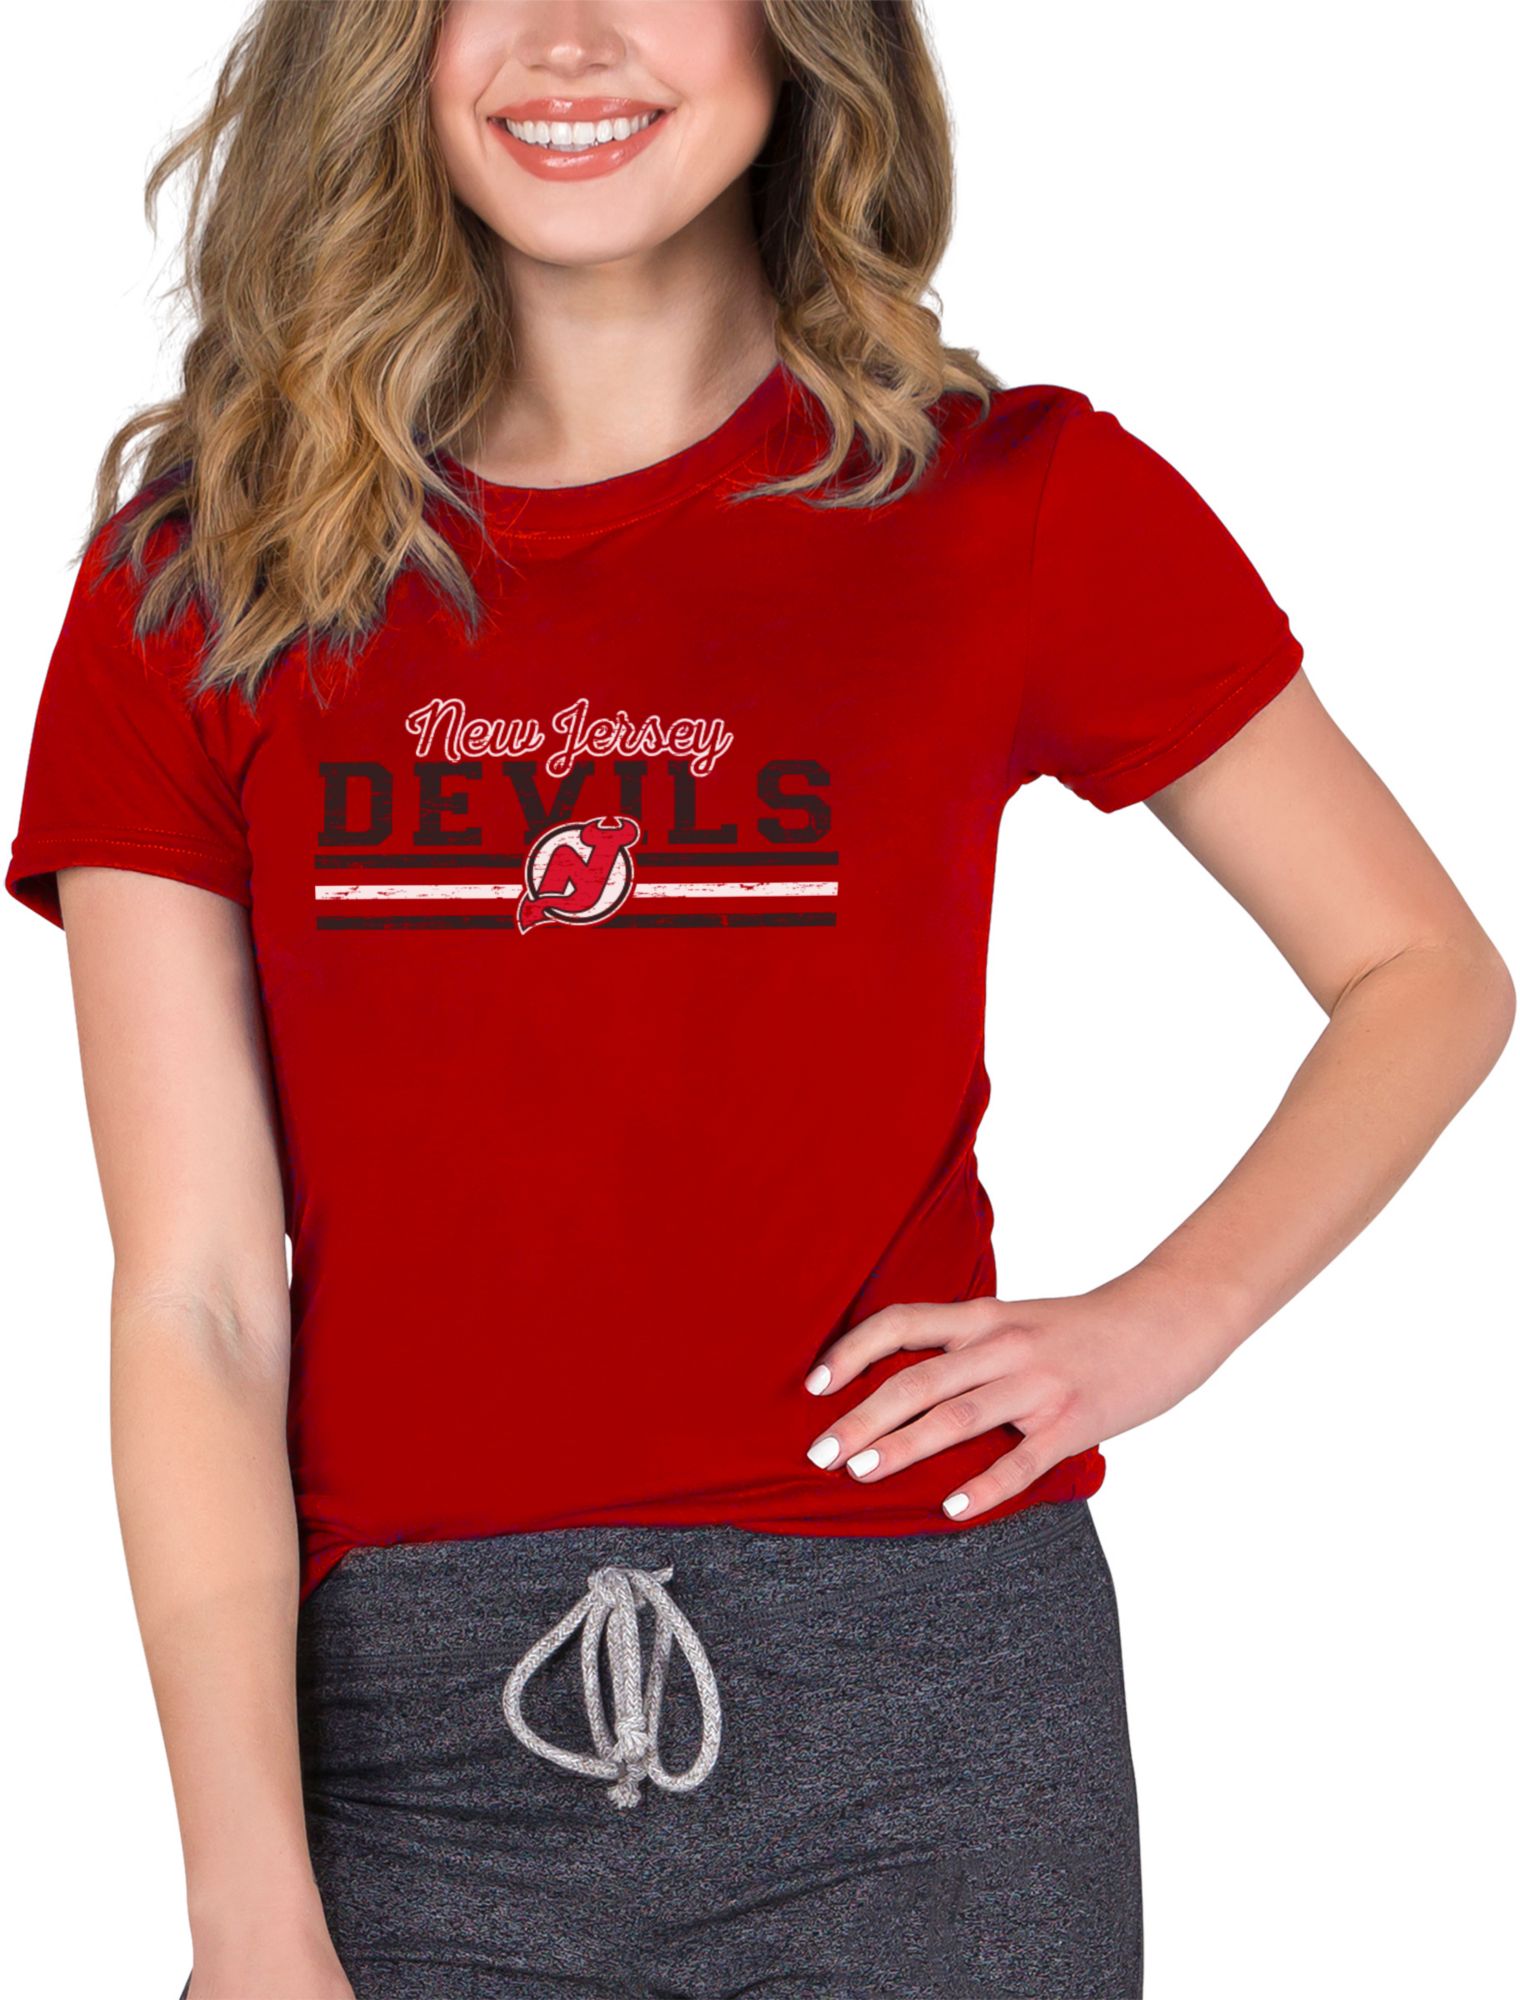 New Jersey Devils clothing